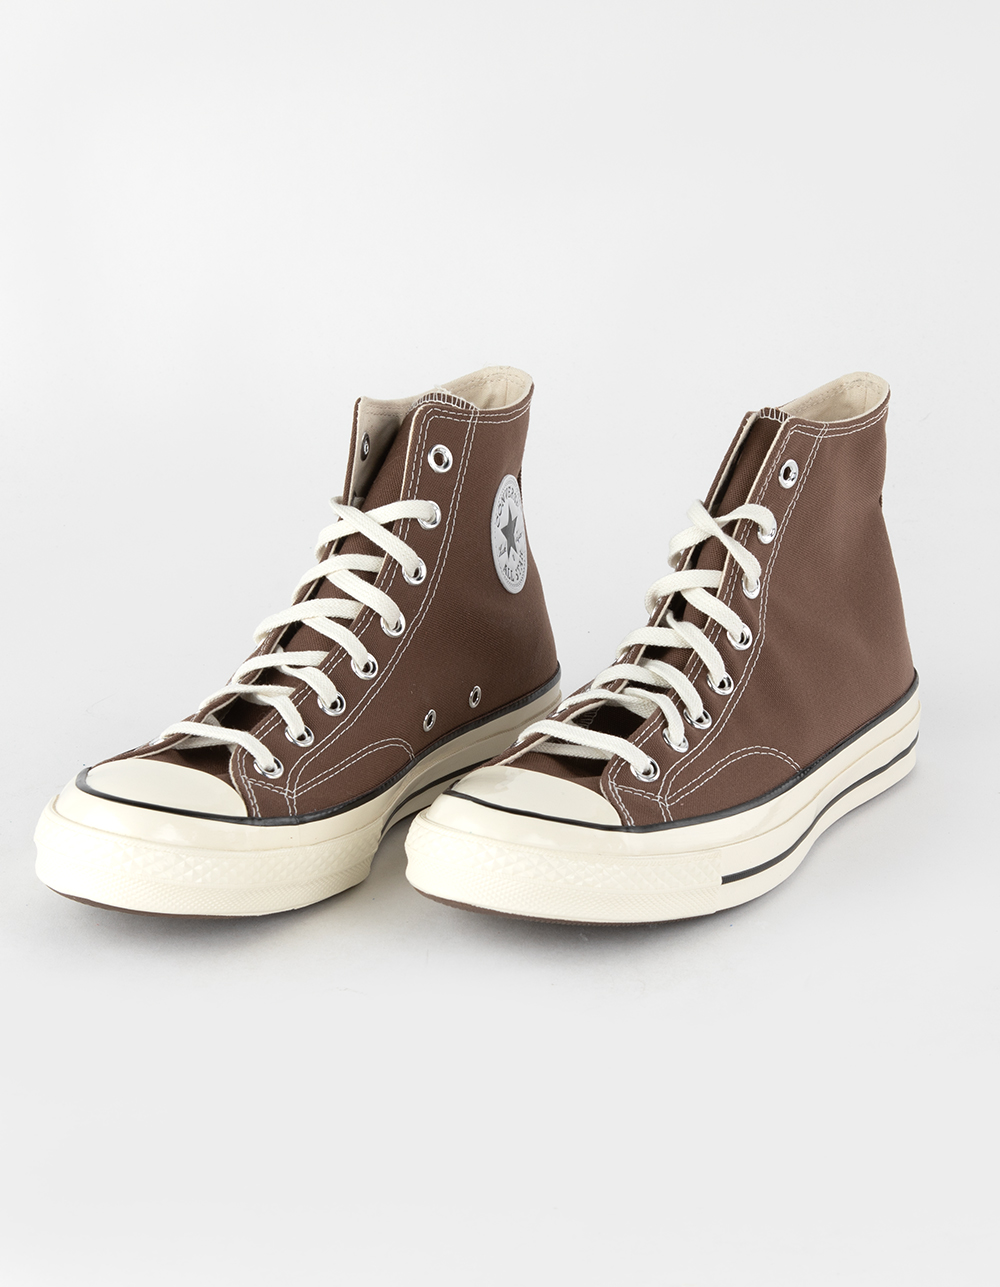 Converse Chuck Taylor All Star Mens Size 8 ,W 10 Brown Leather High Top  Sneakers